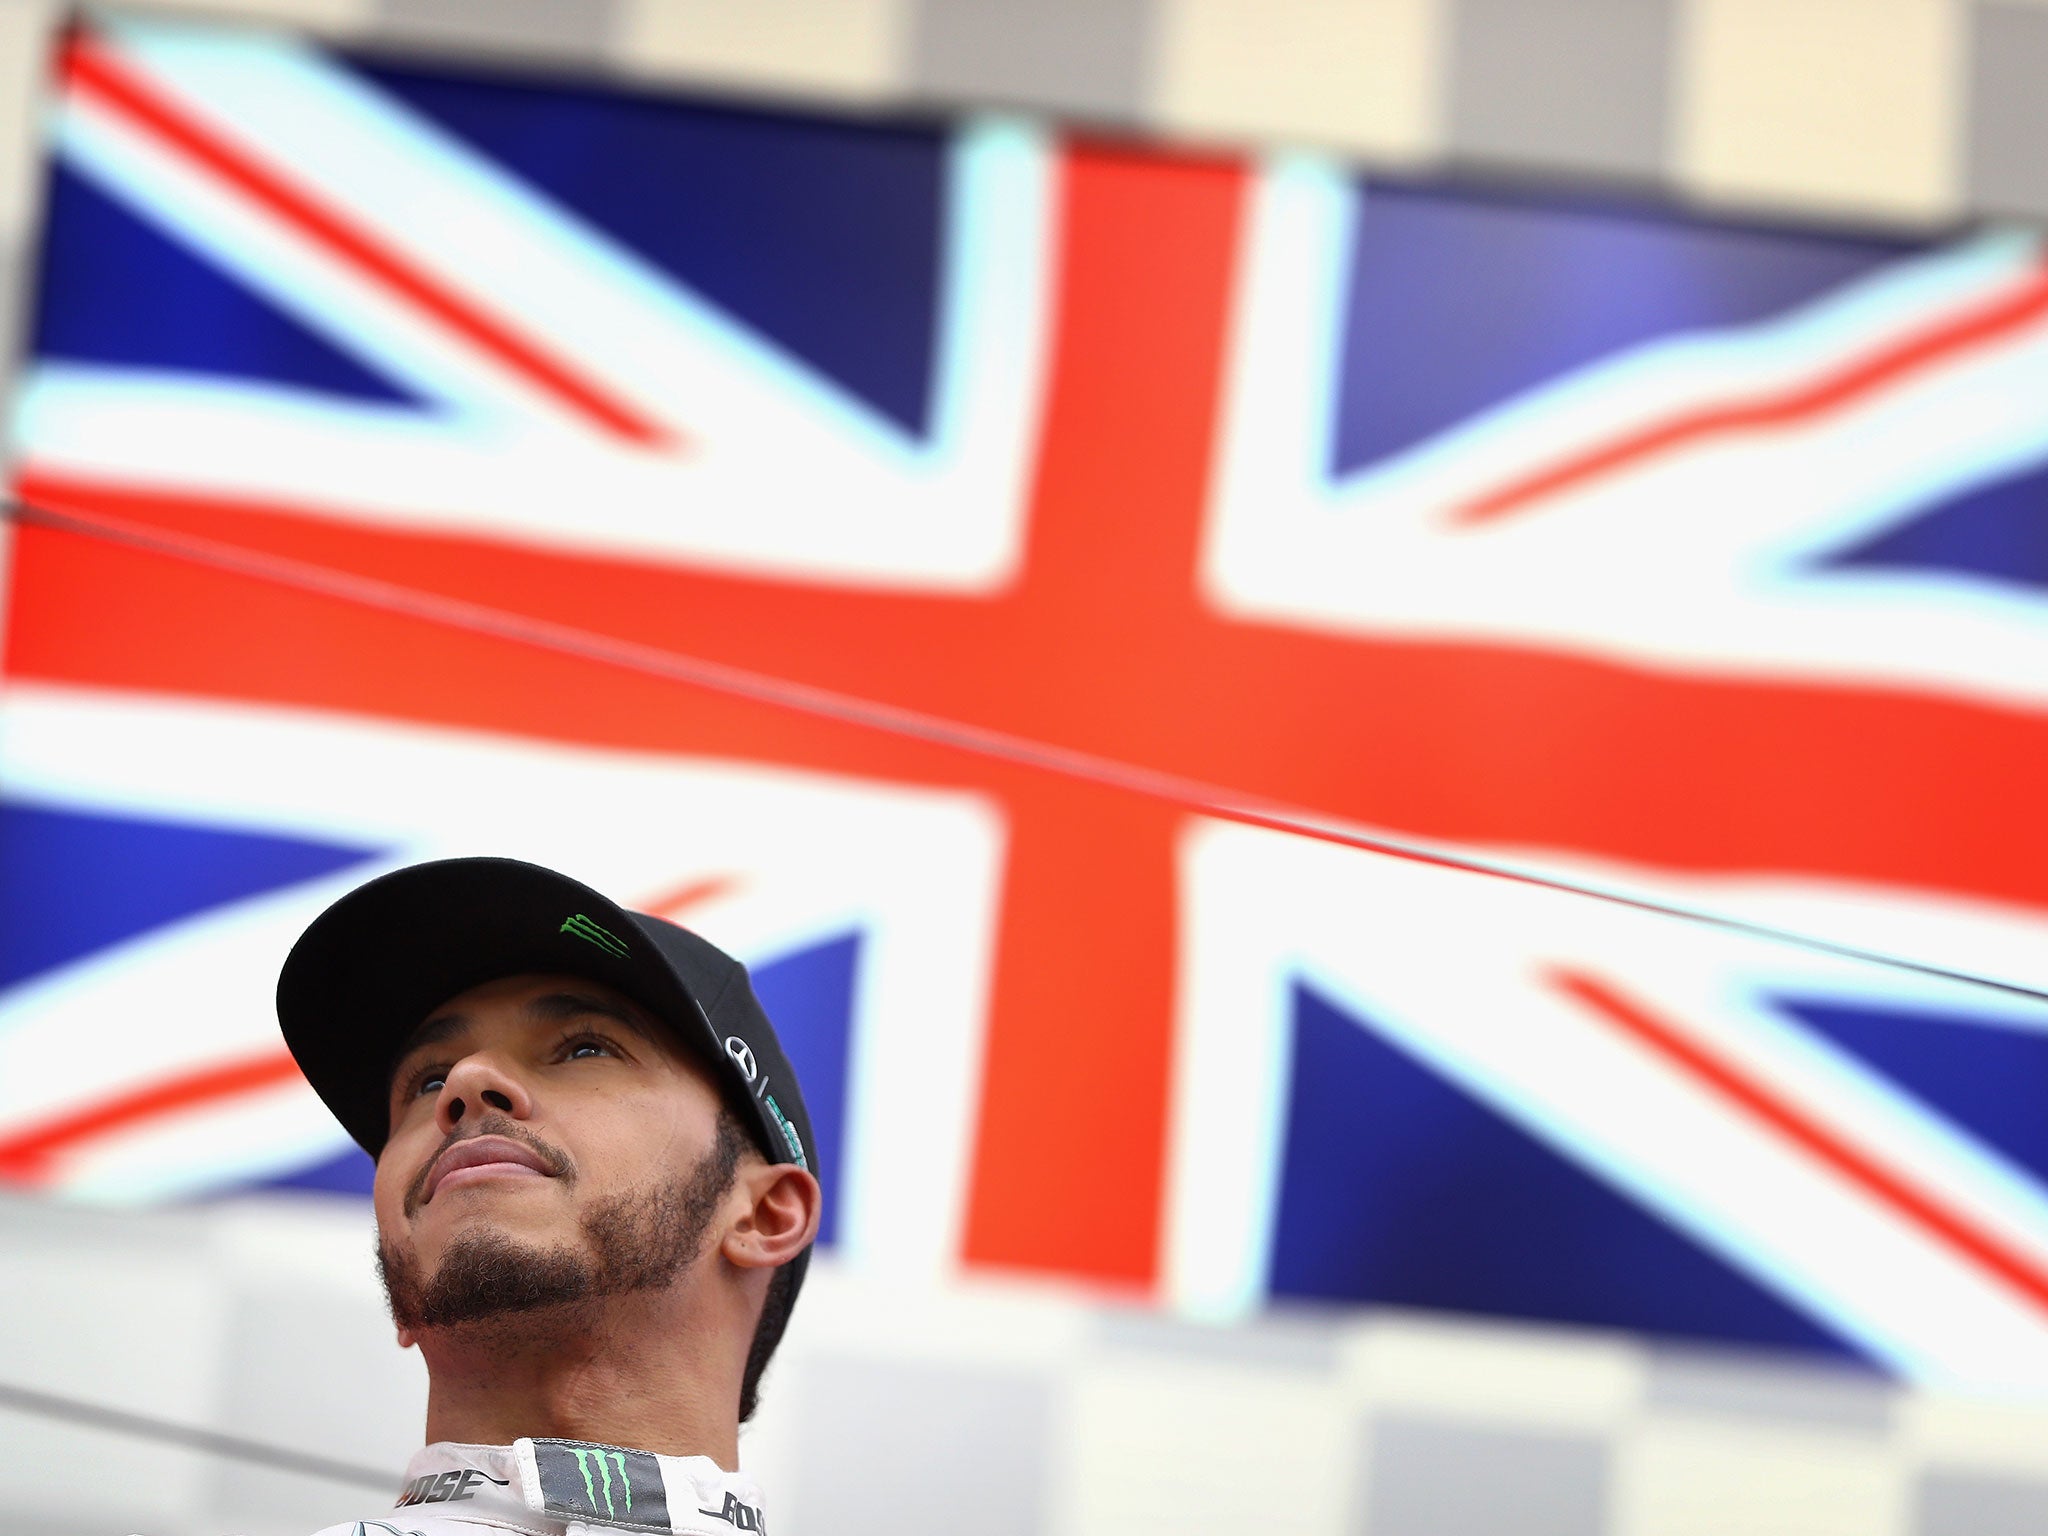 Hamilton has endured a turbulent past week following the events of the Malaysian Grand Prix